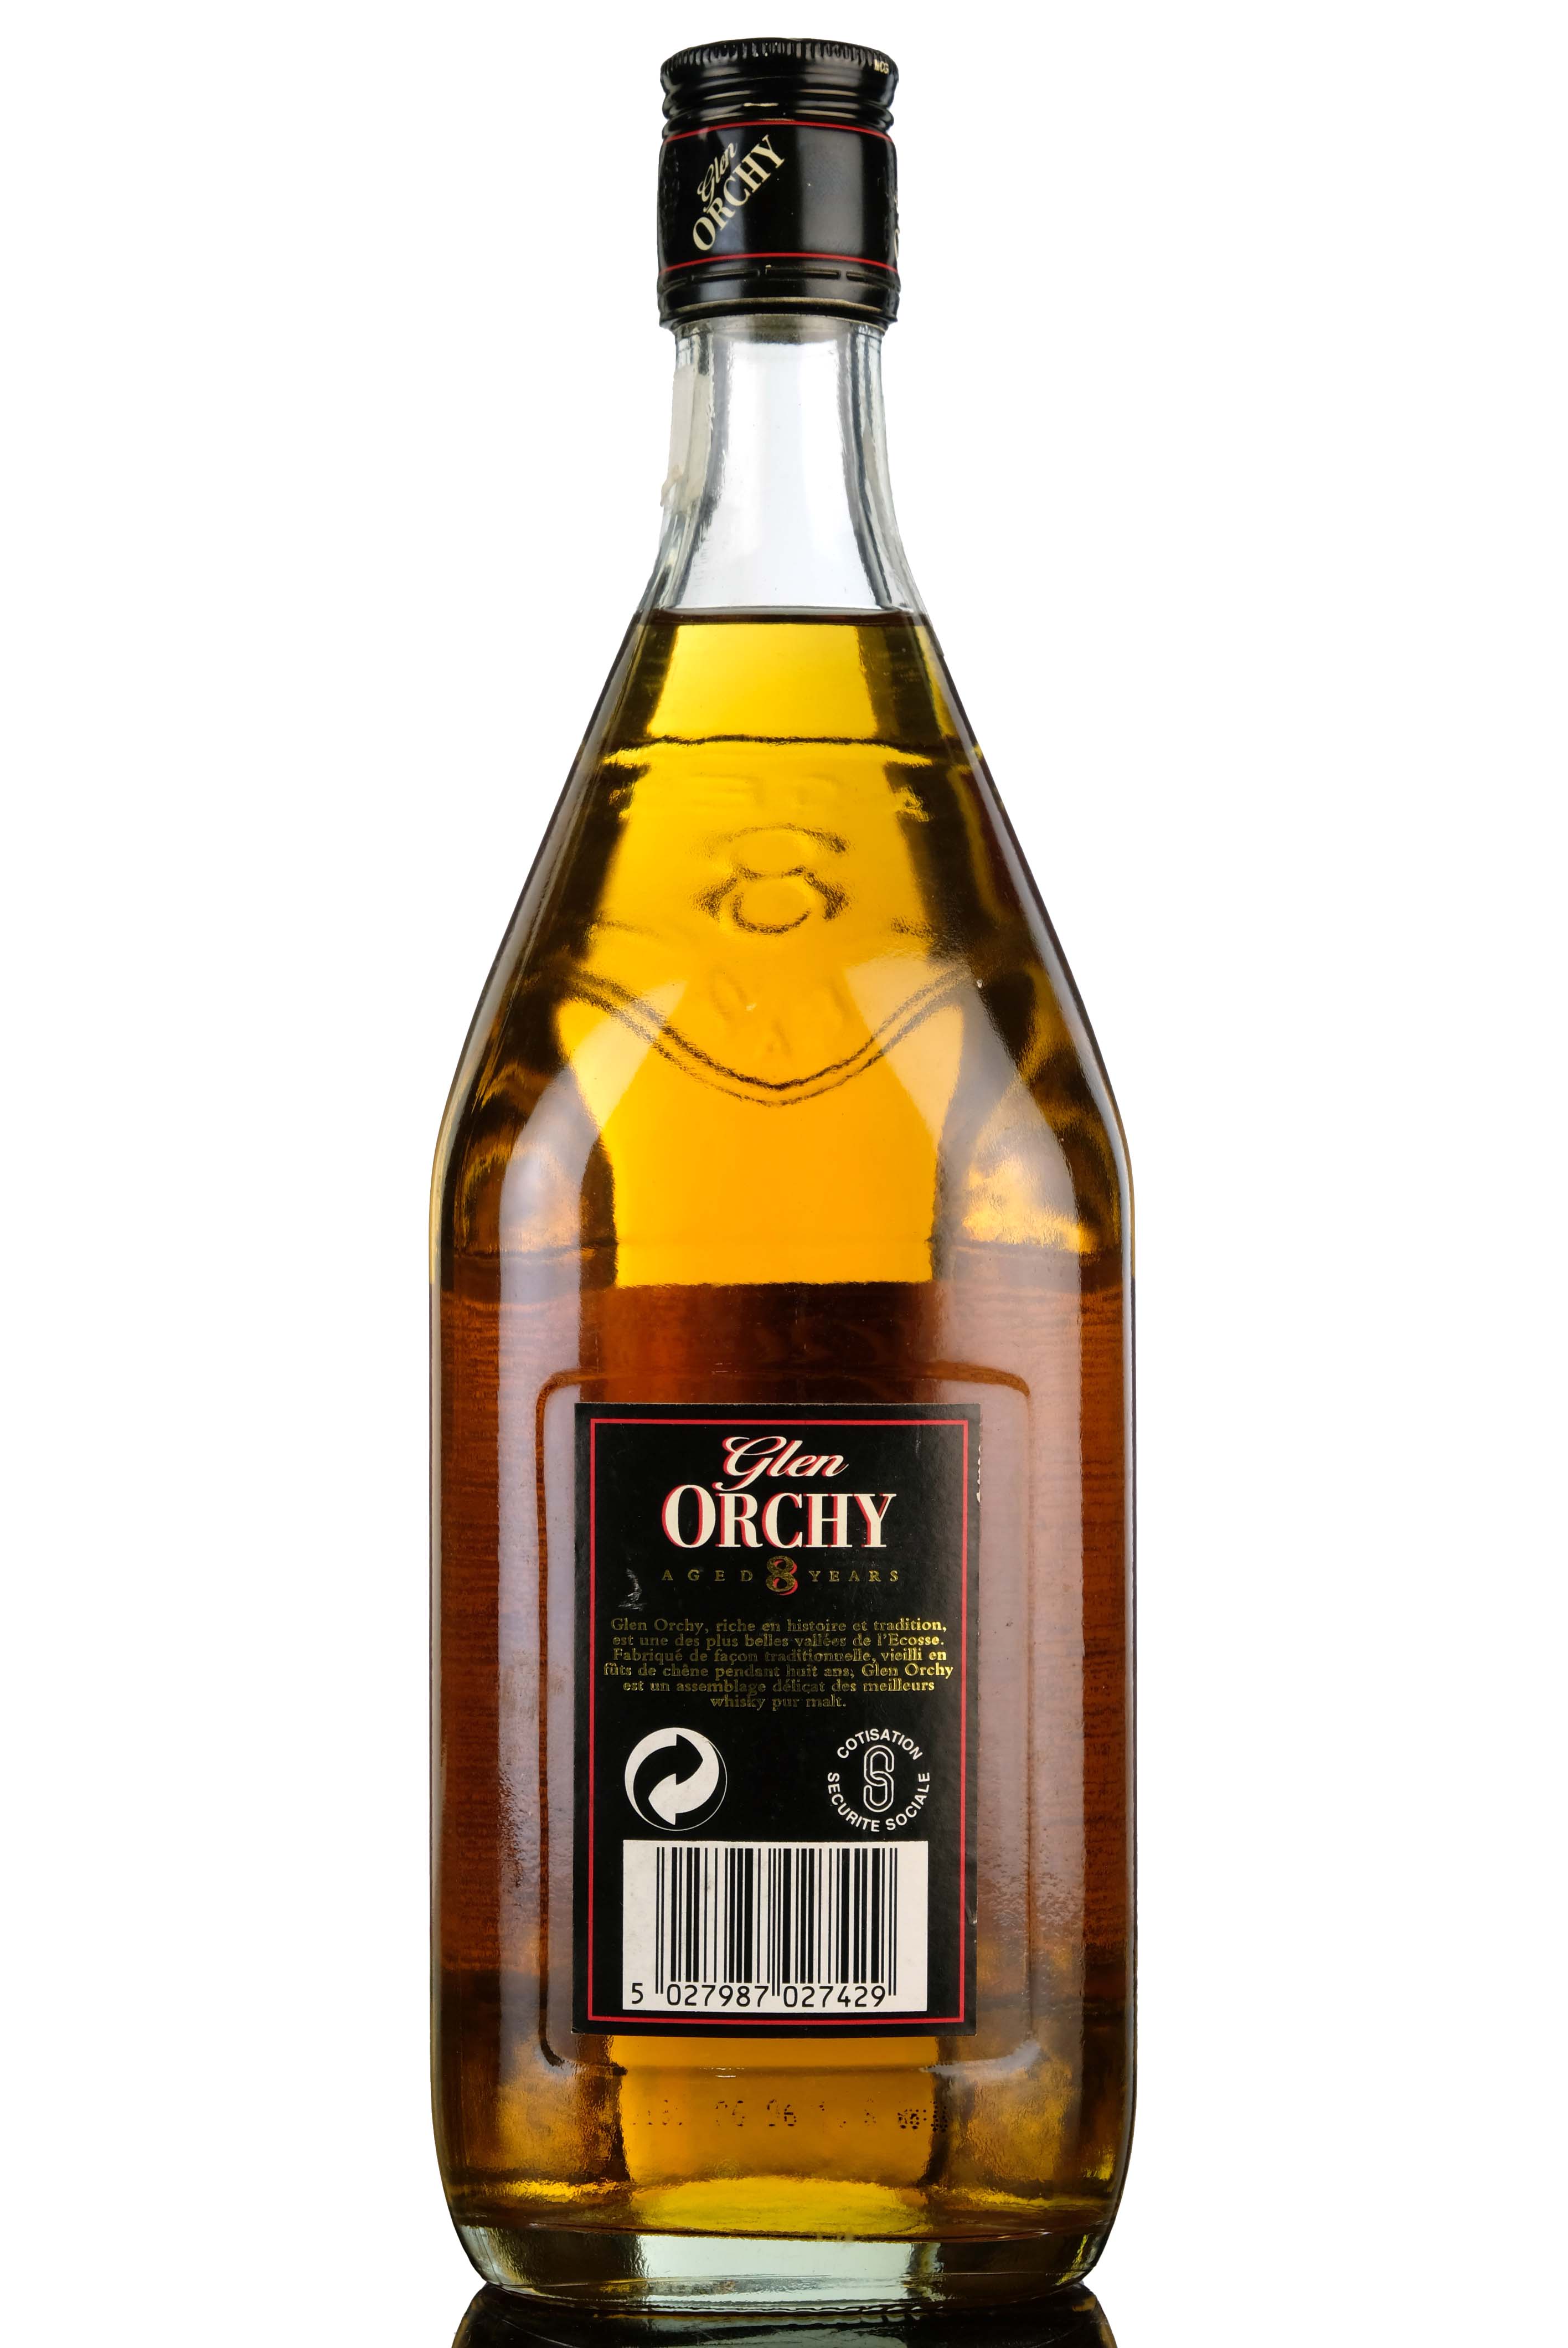 Glen Orchy 8 Year Old